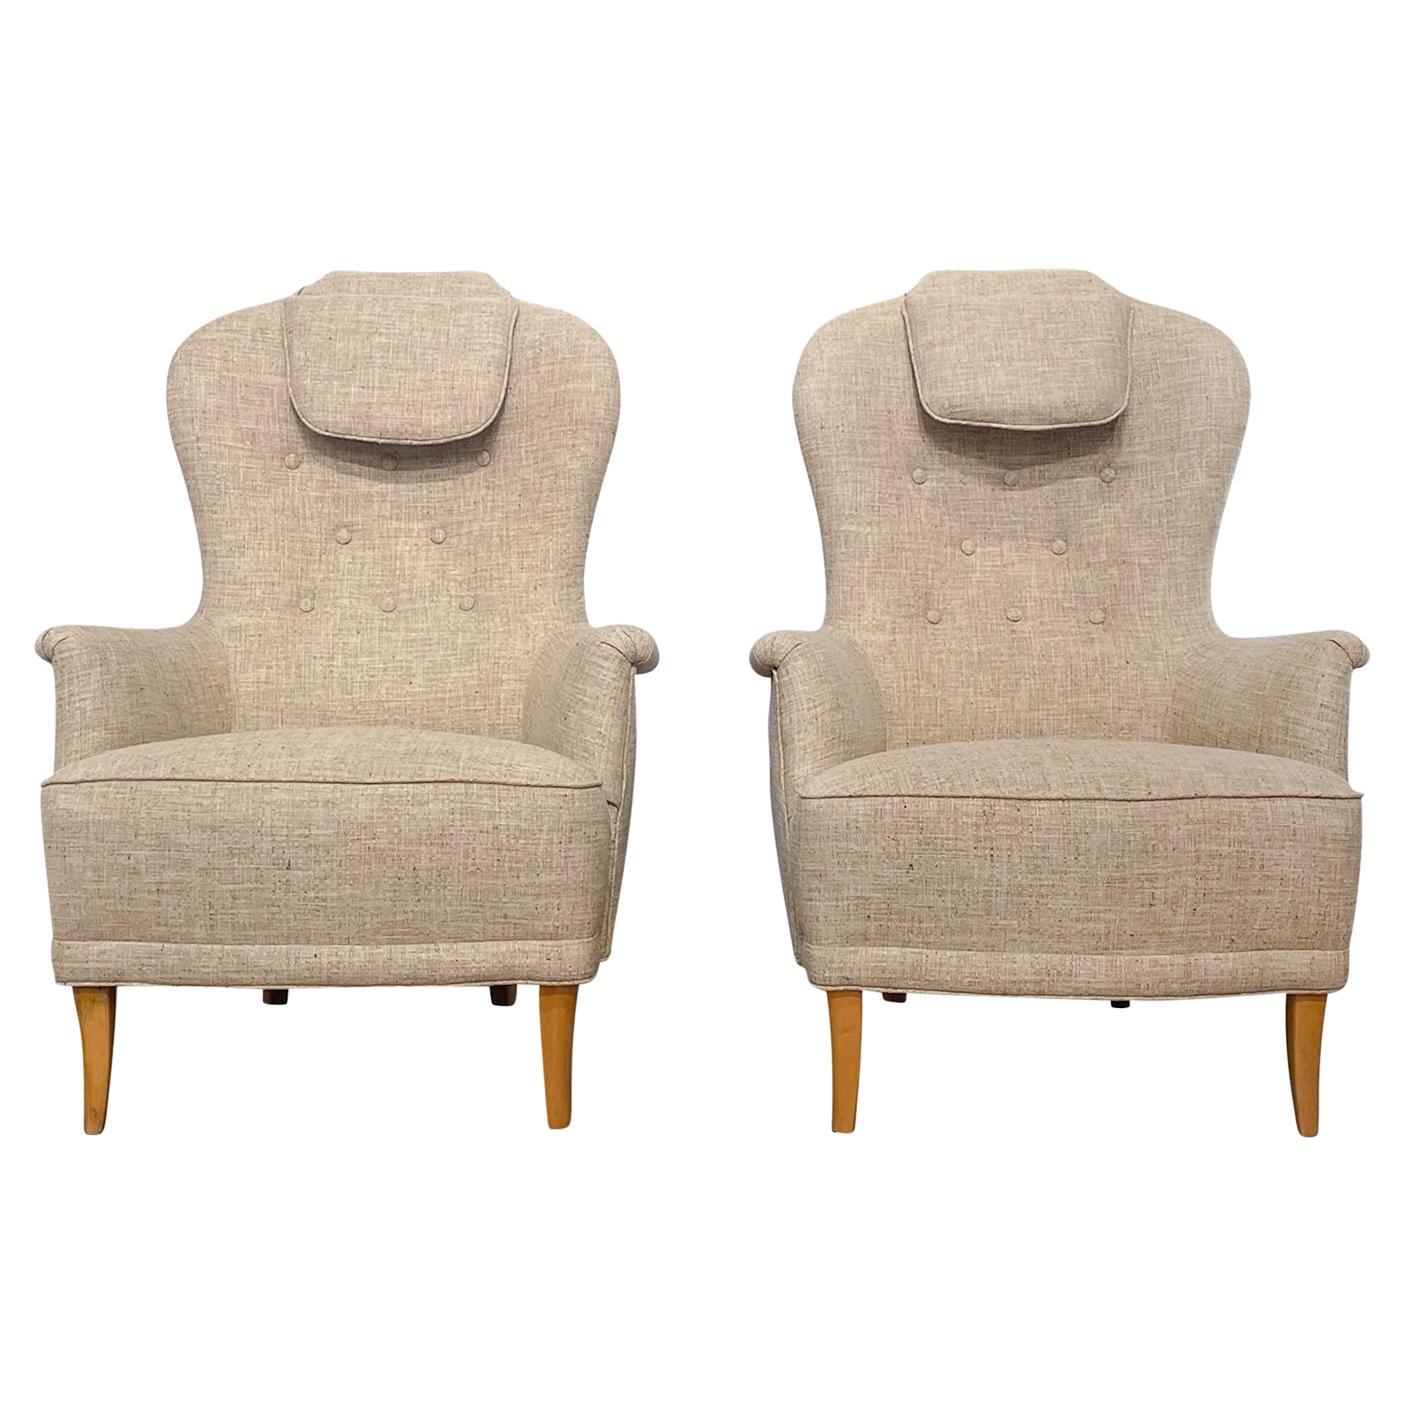 20th Century Swedish Pair of Vintage O.H. Sjögren Armchairs by Carl Malmsten For Sale